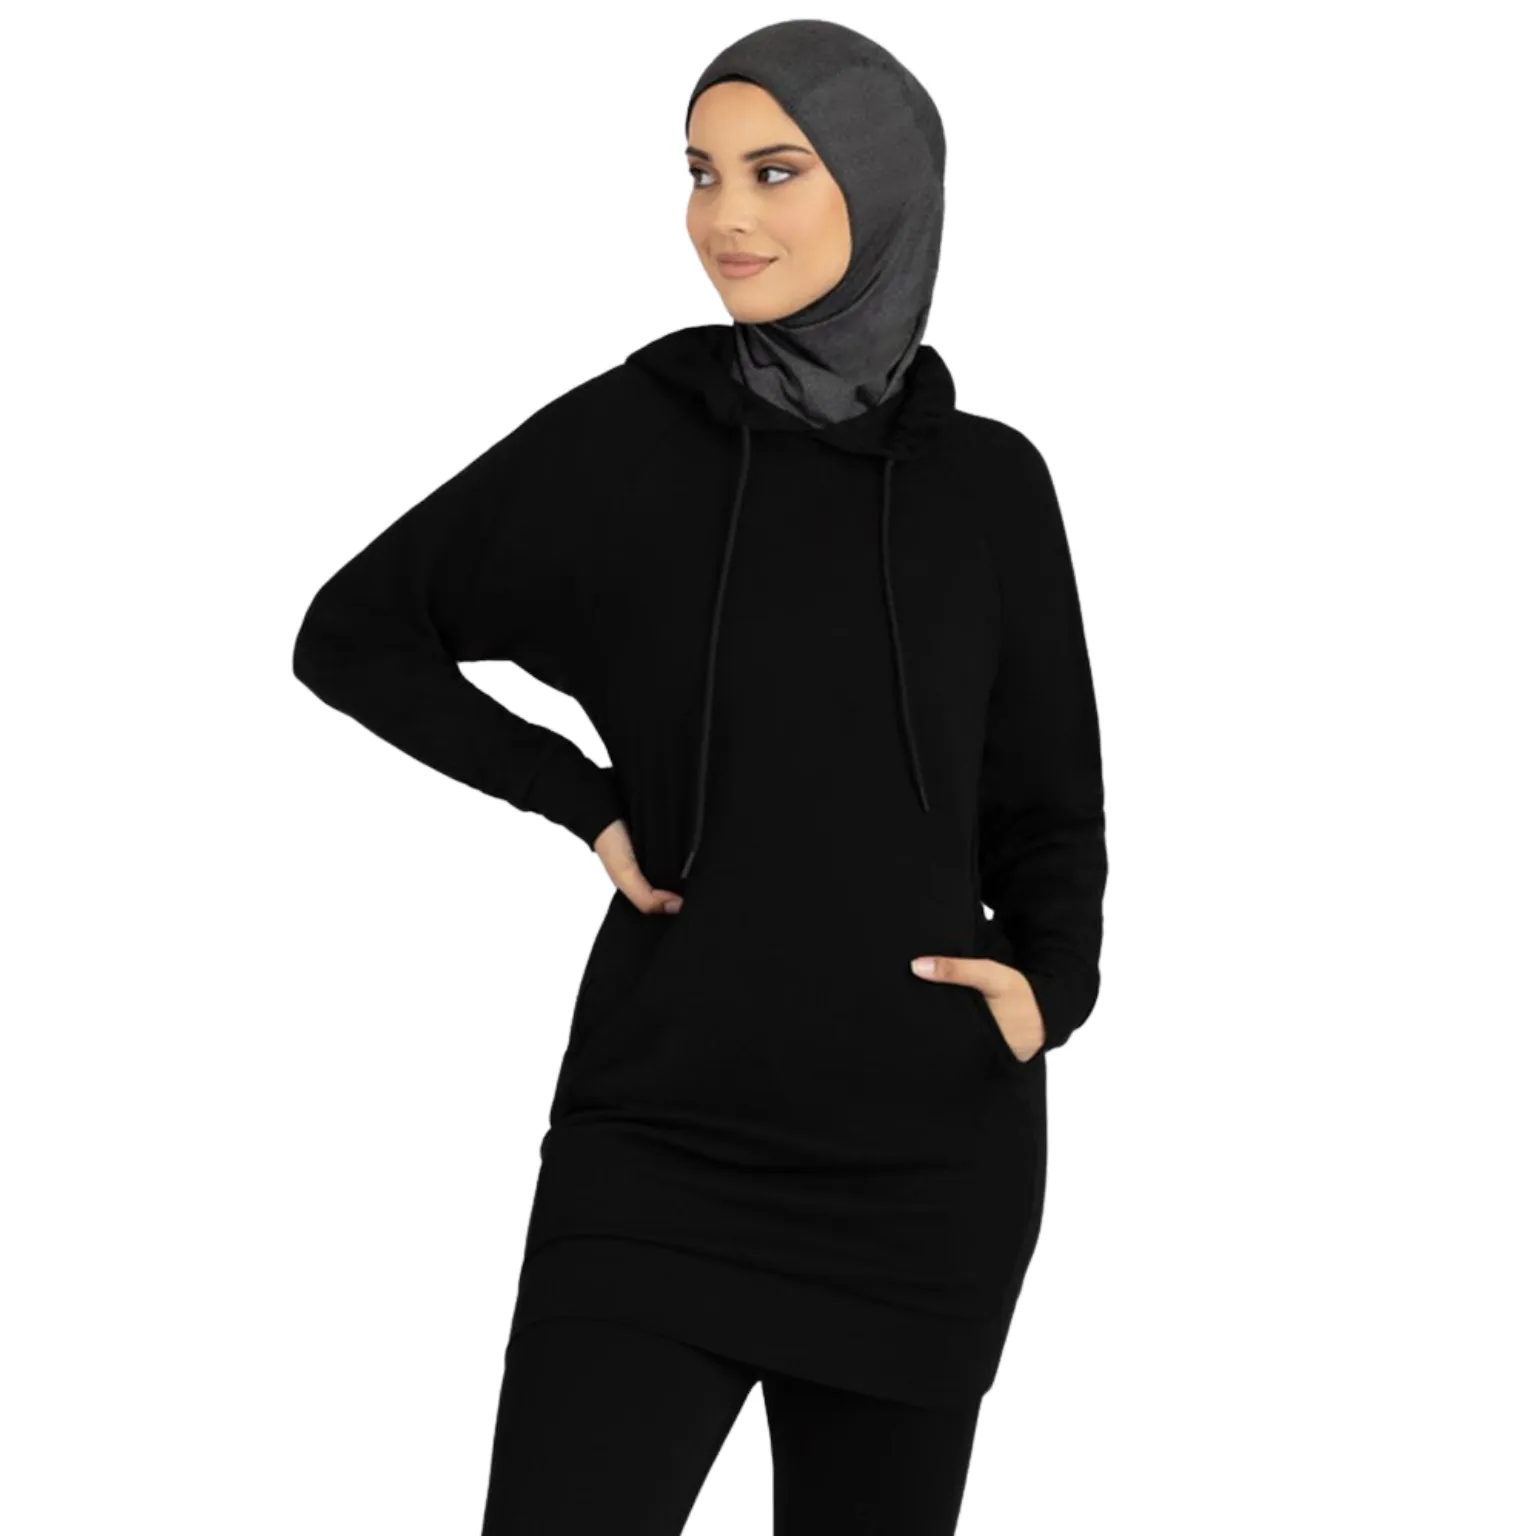 Hijab Hoodie manufacturing with superior quality